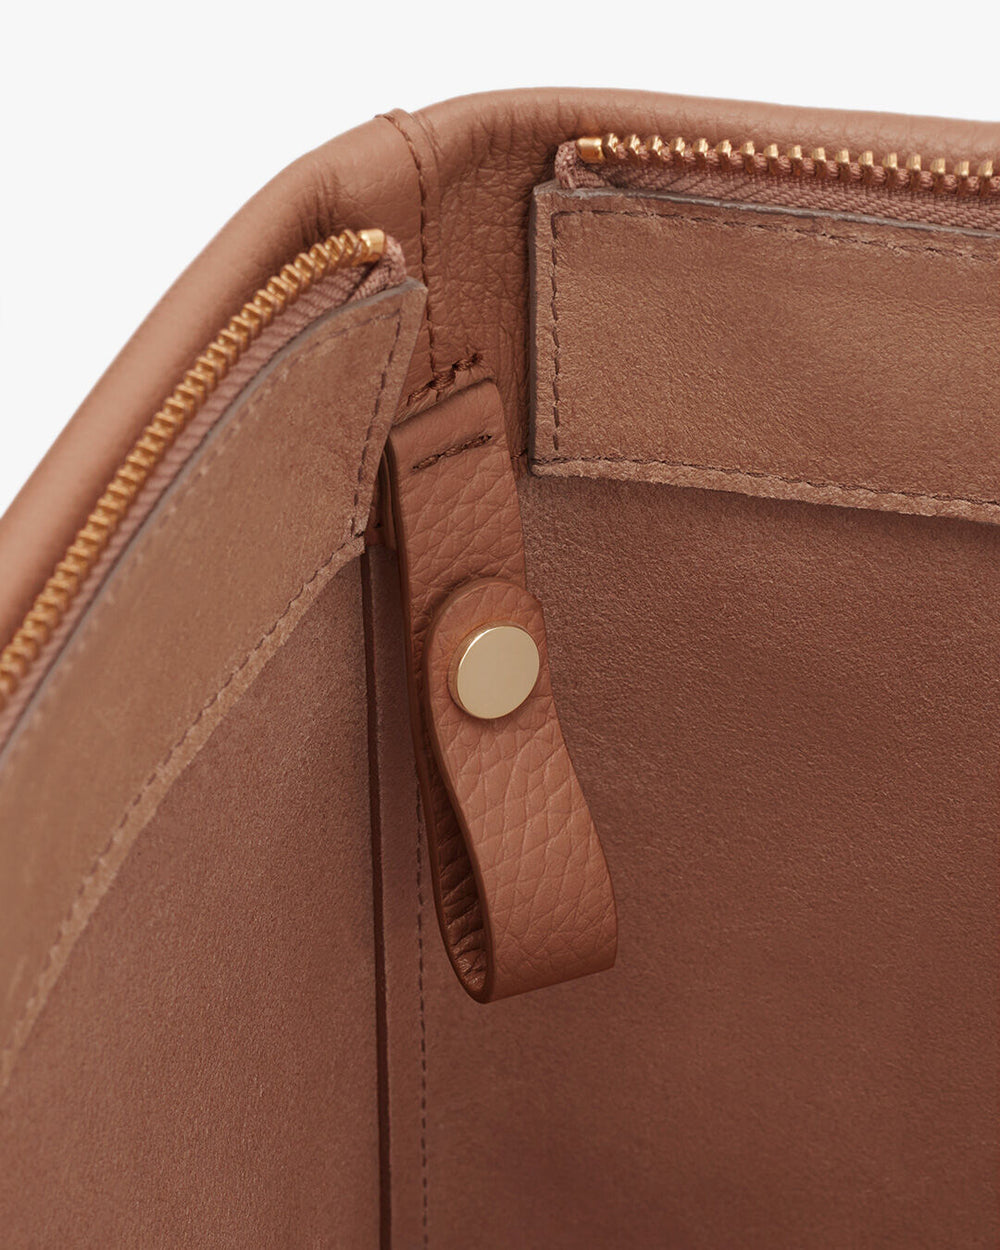 Close-up view of a bag showing zipper, stitching, and snap button detail.